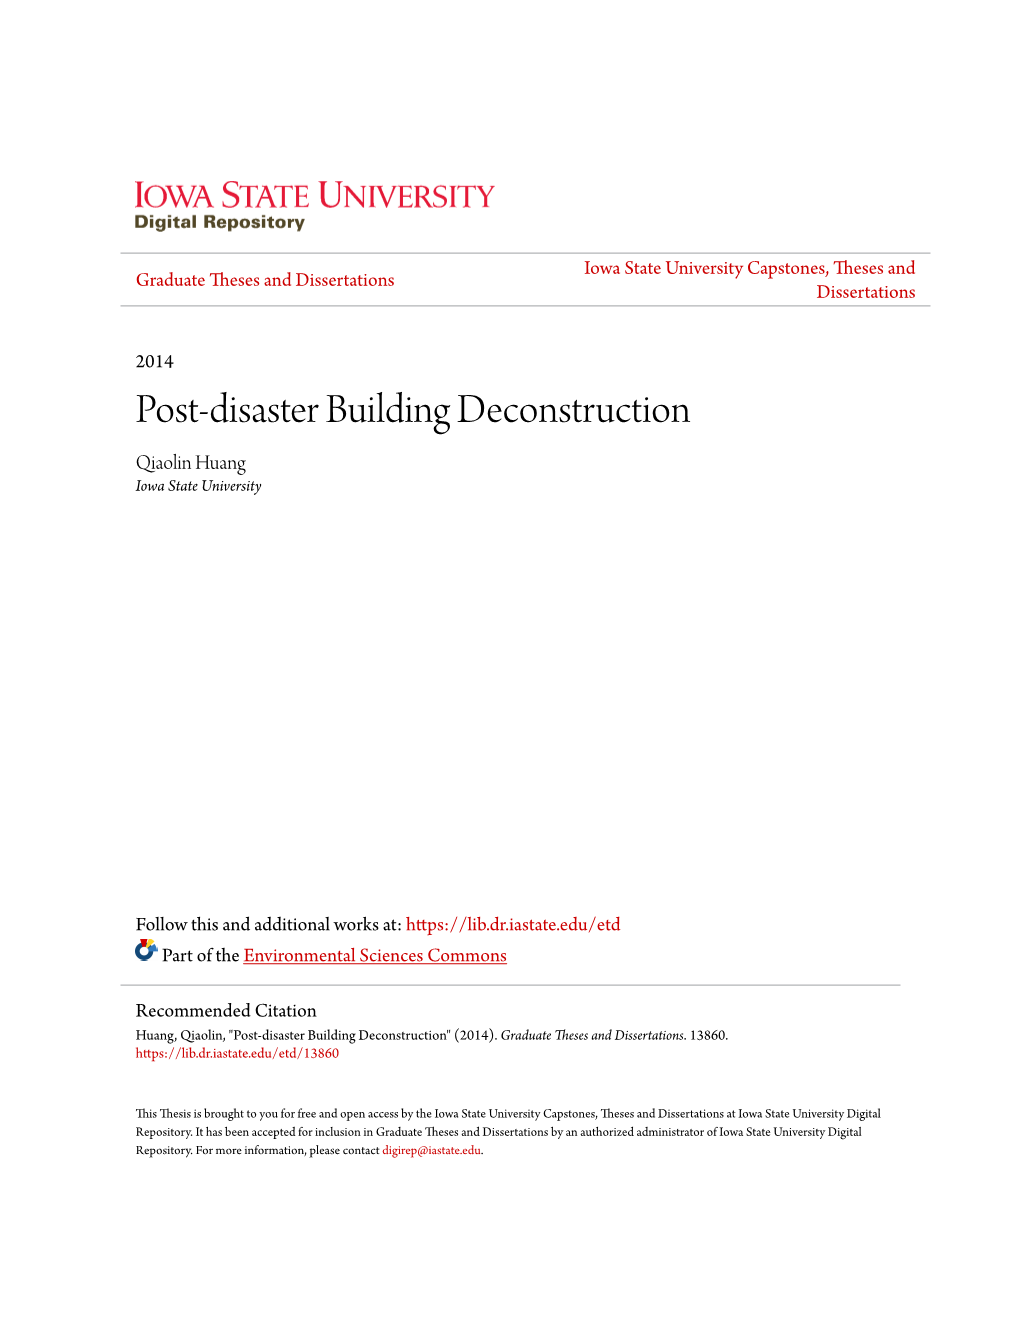 Post-Disaster Building Deconstruction Qiaolin Huang Iowa State University